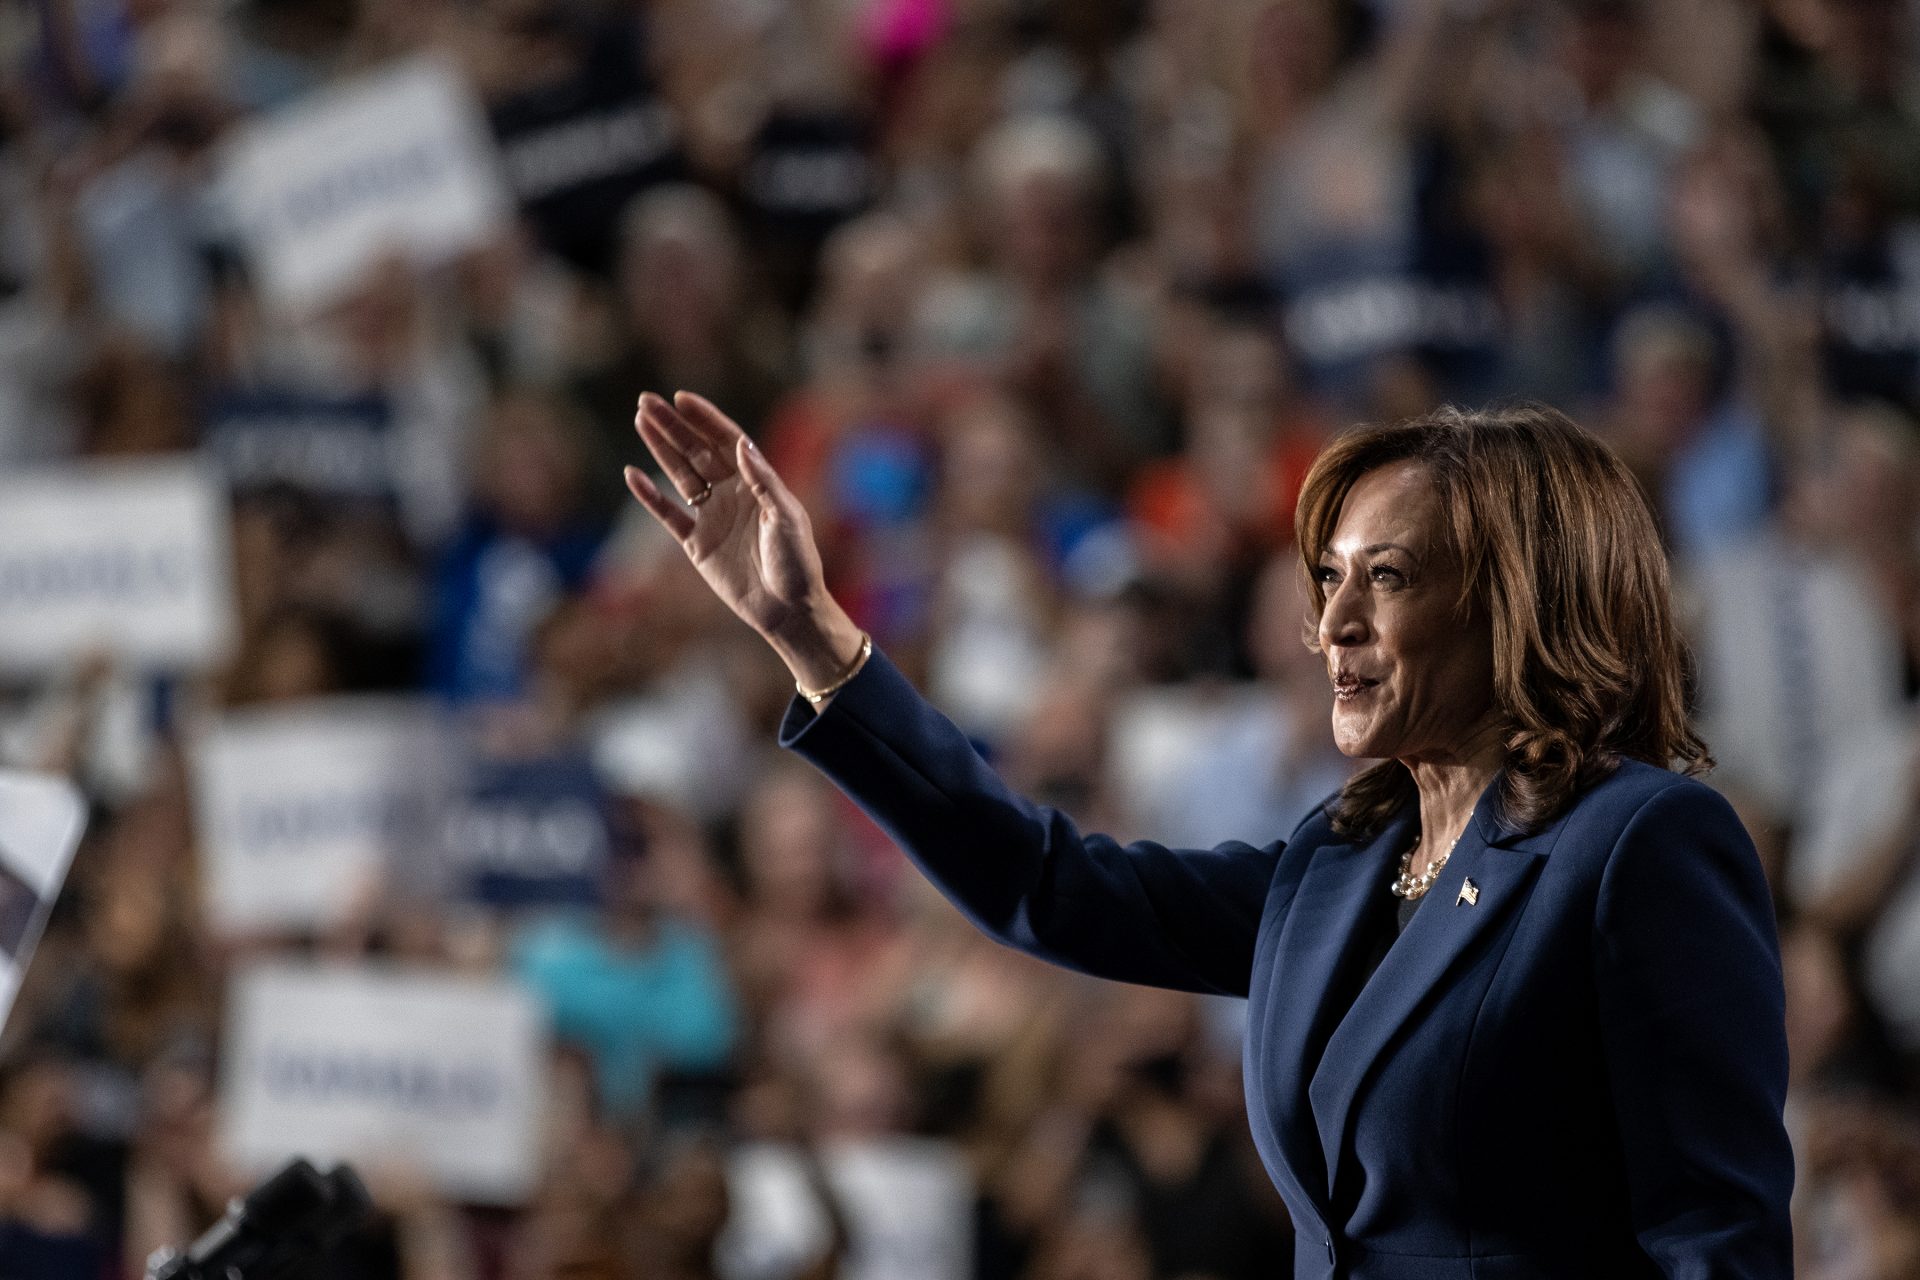 Kamala Harris is raising record-breaking amounts of donations and it could help her defeat Trump